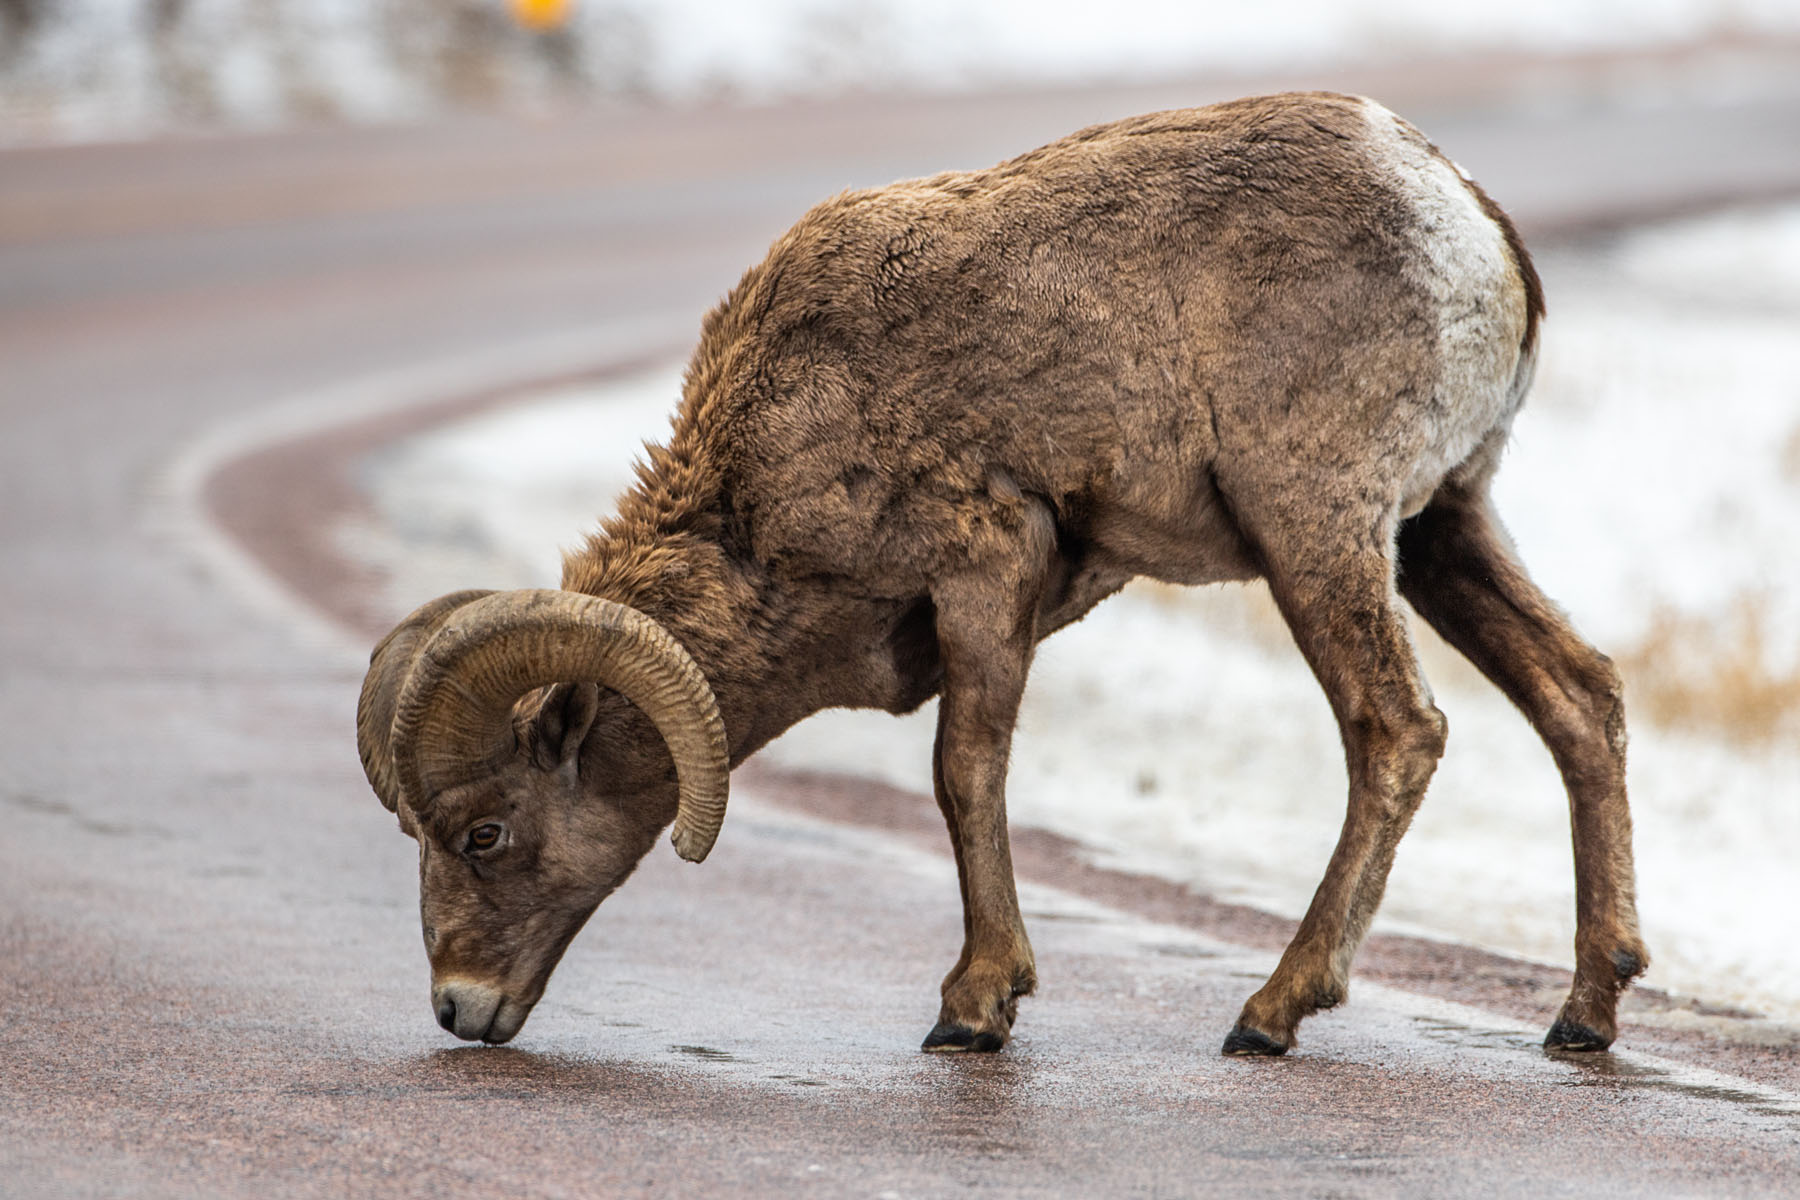 Bighorn ram licking the road, southern Custer State Park.  Click for next photo.